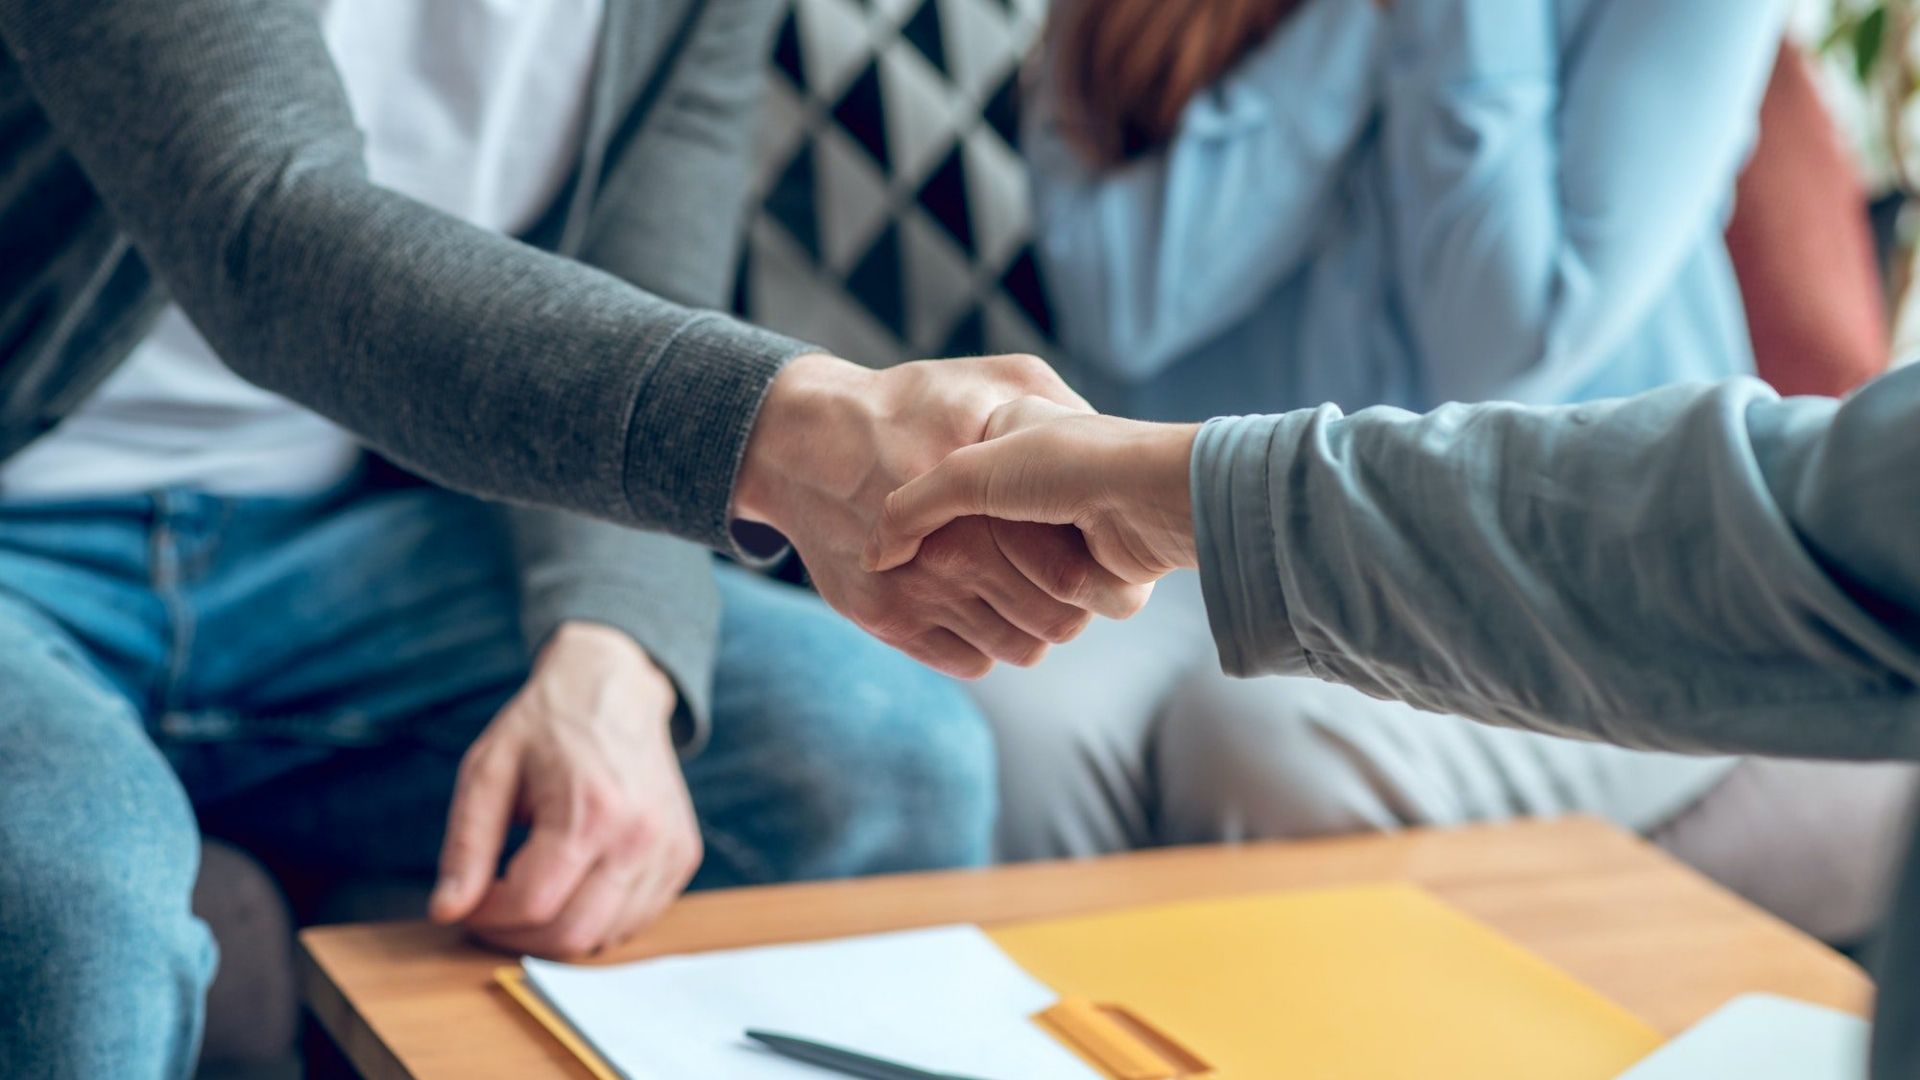 Building Trust and Setting Realistic Expectations - Hands in handshake making a deal